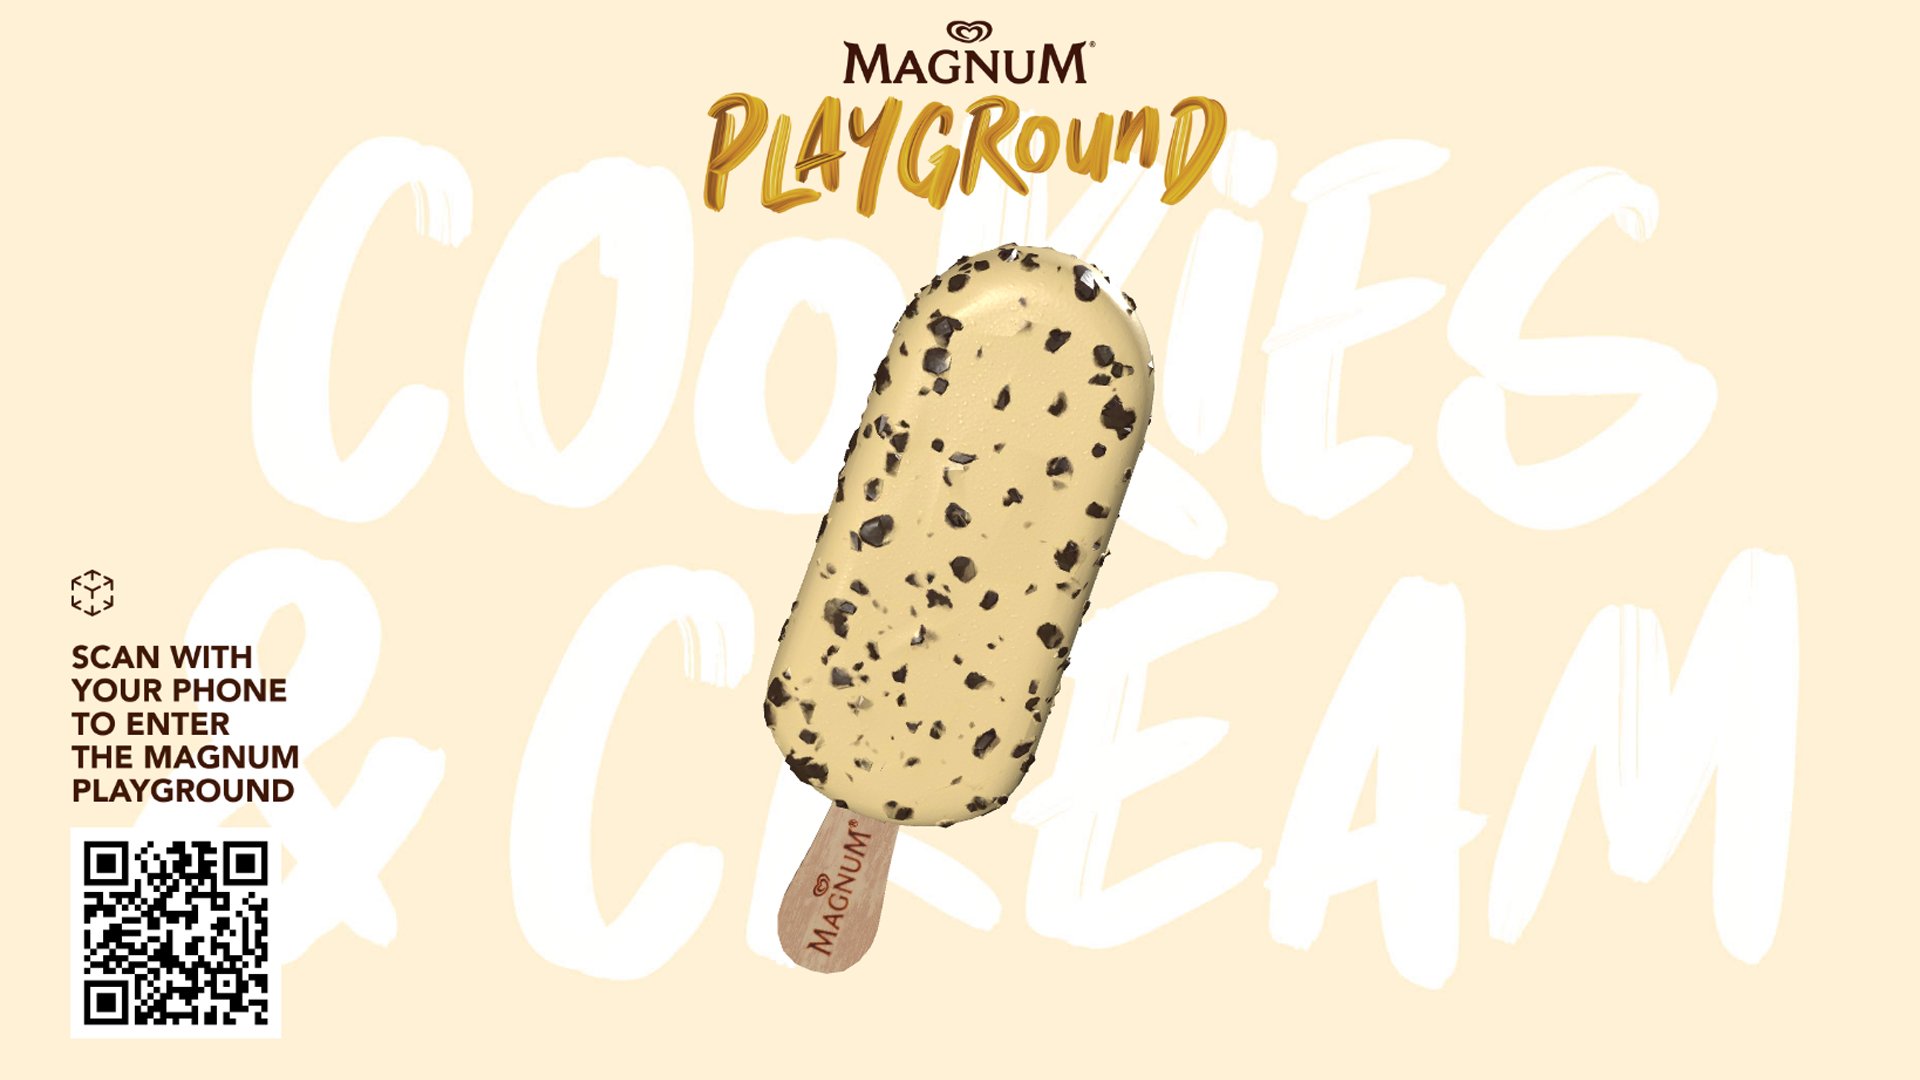 Enter the magnum playground AR portal to celebrate the launch of the cookies & cream variety across Asia